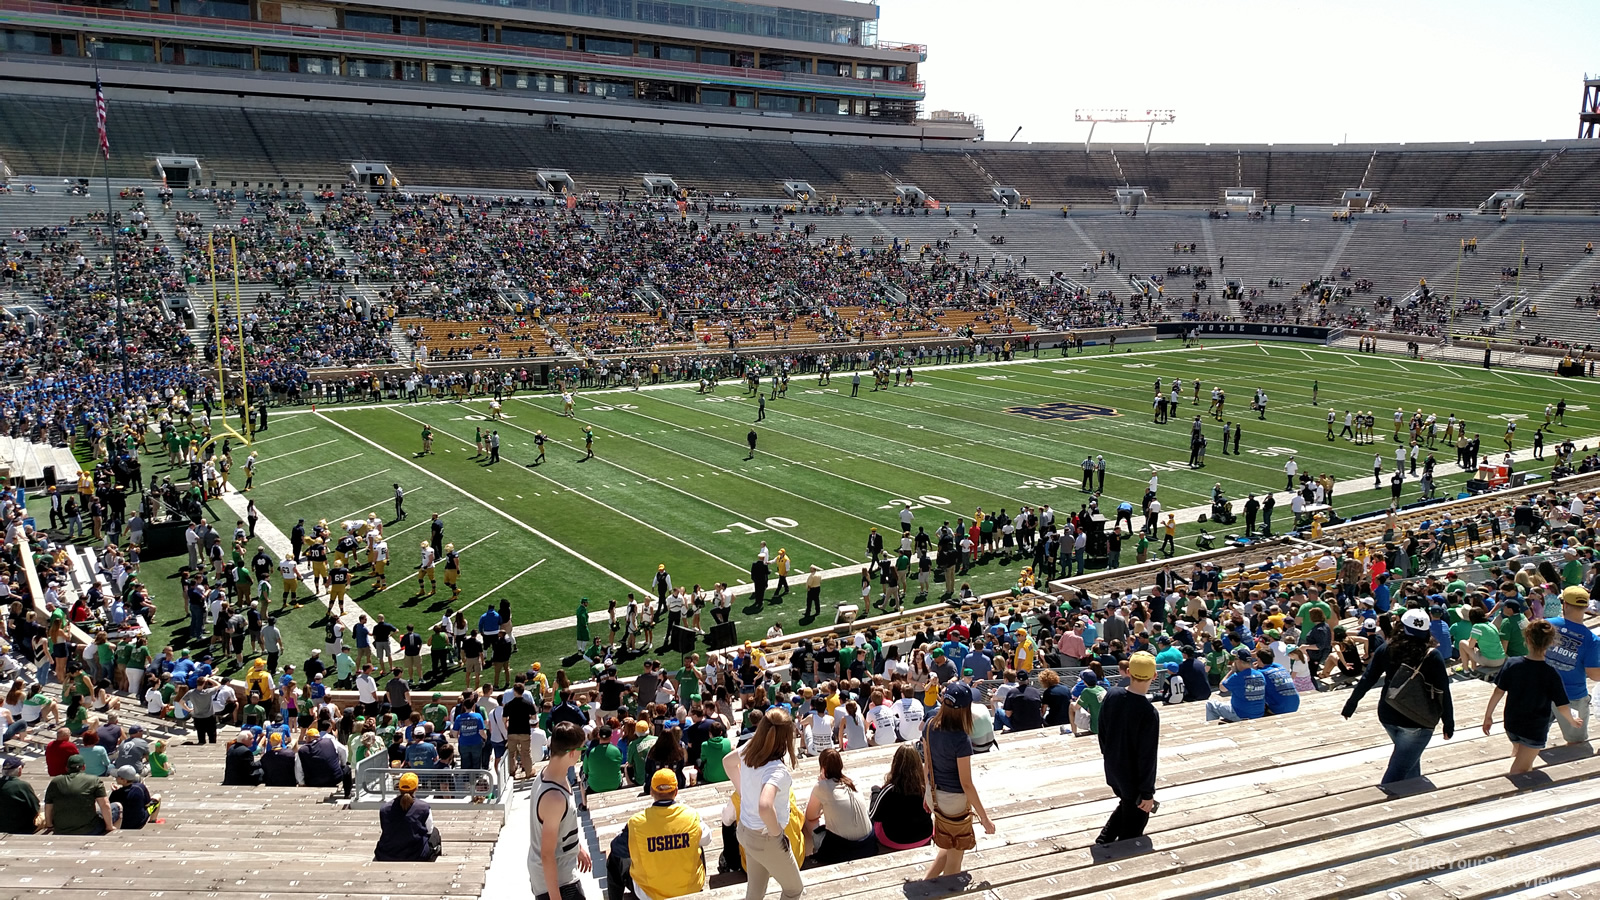 section 32, row 52 seat view  - notre dame stadium